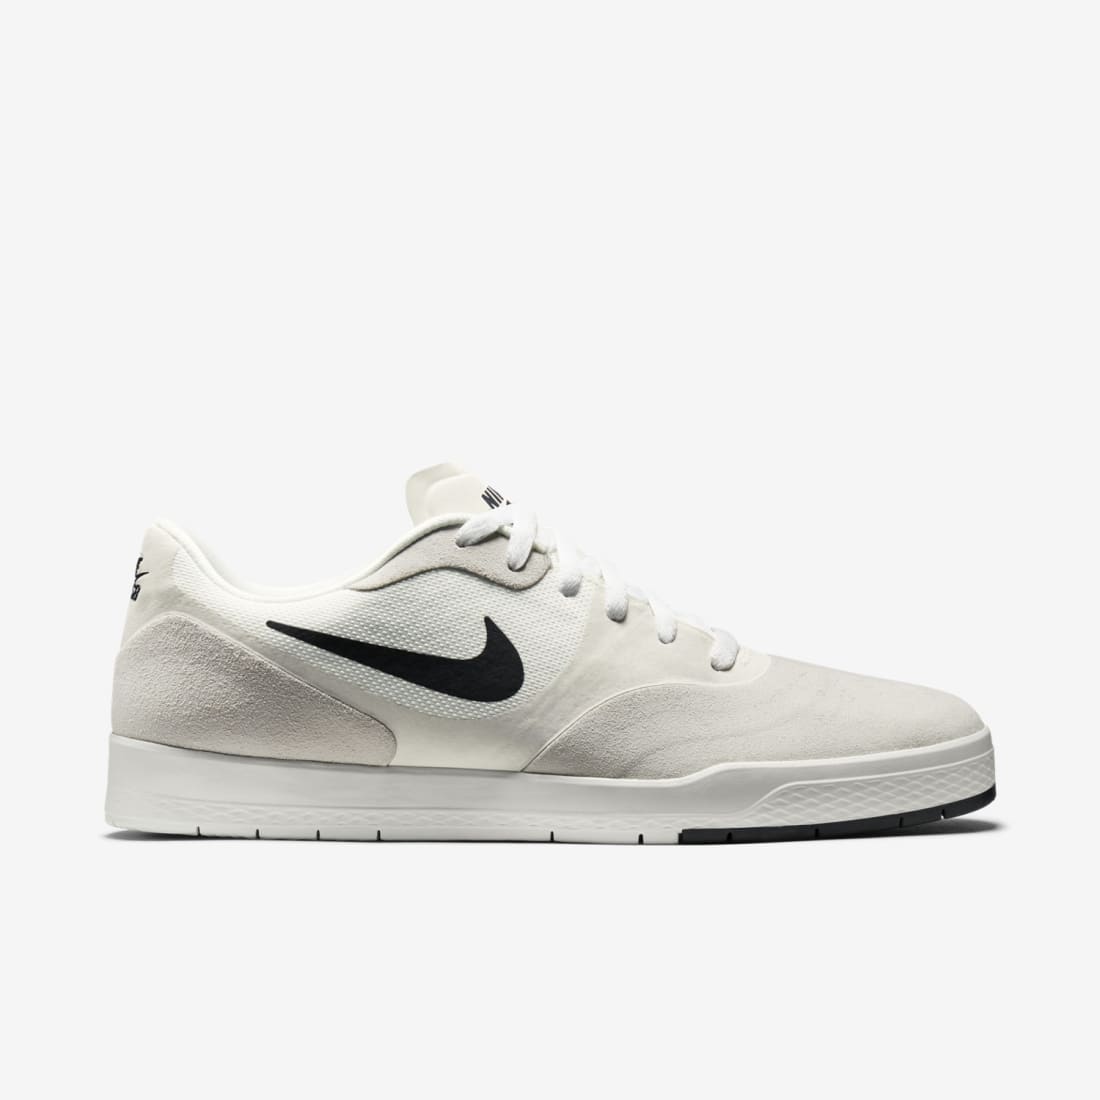 Modernize Confirmation desirable Nike SB Paul Rodriguez 9 | Nike | Sneaker News, Launches, Release Dates,  Collabs & Info